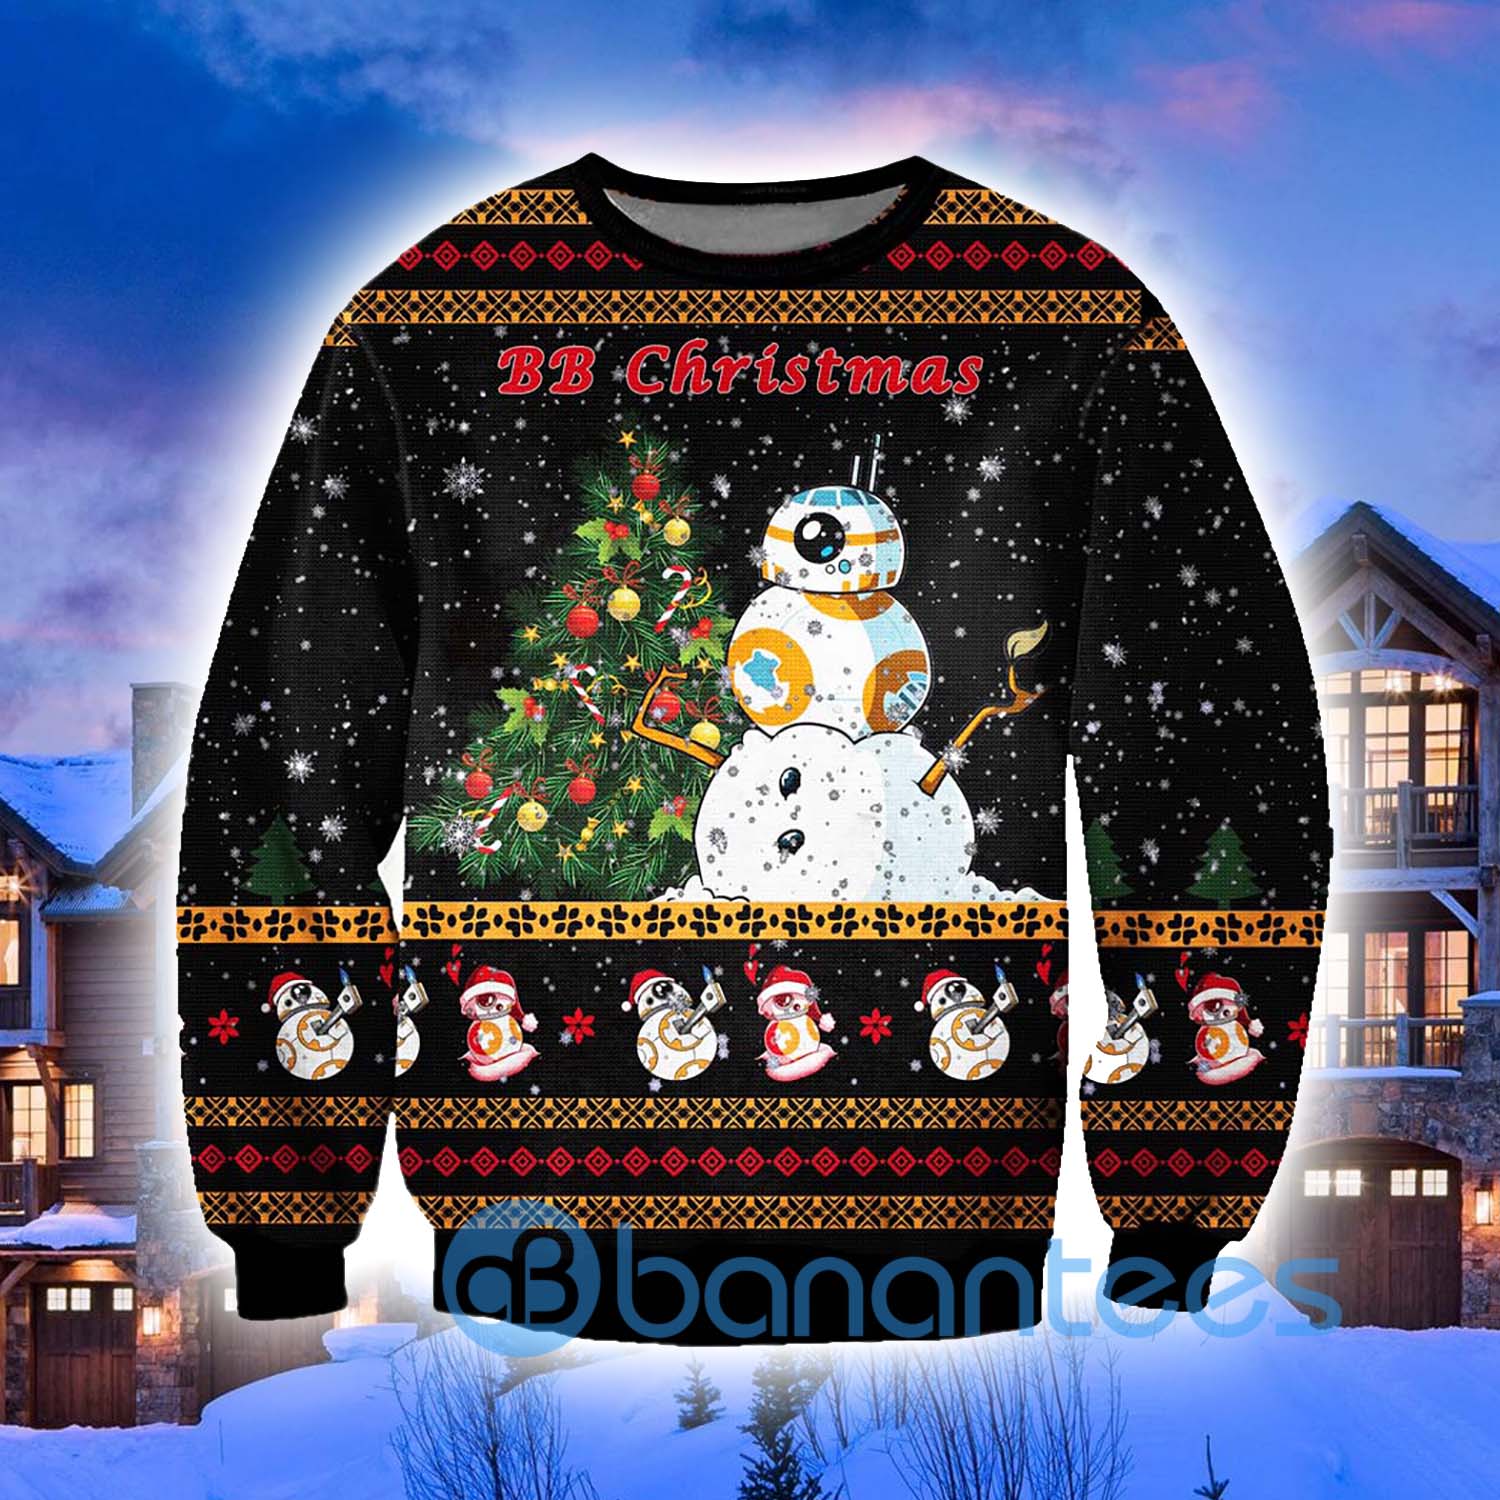 Star Wars BB Christmas Sweater | Where To Buy